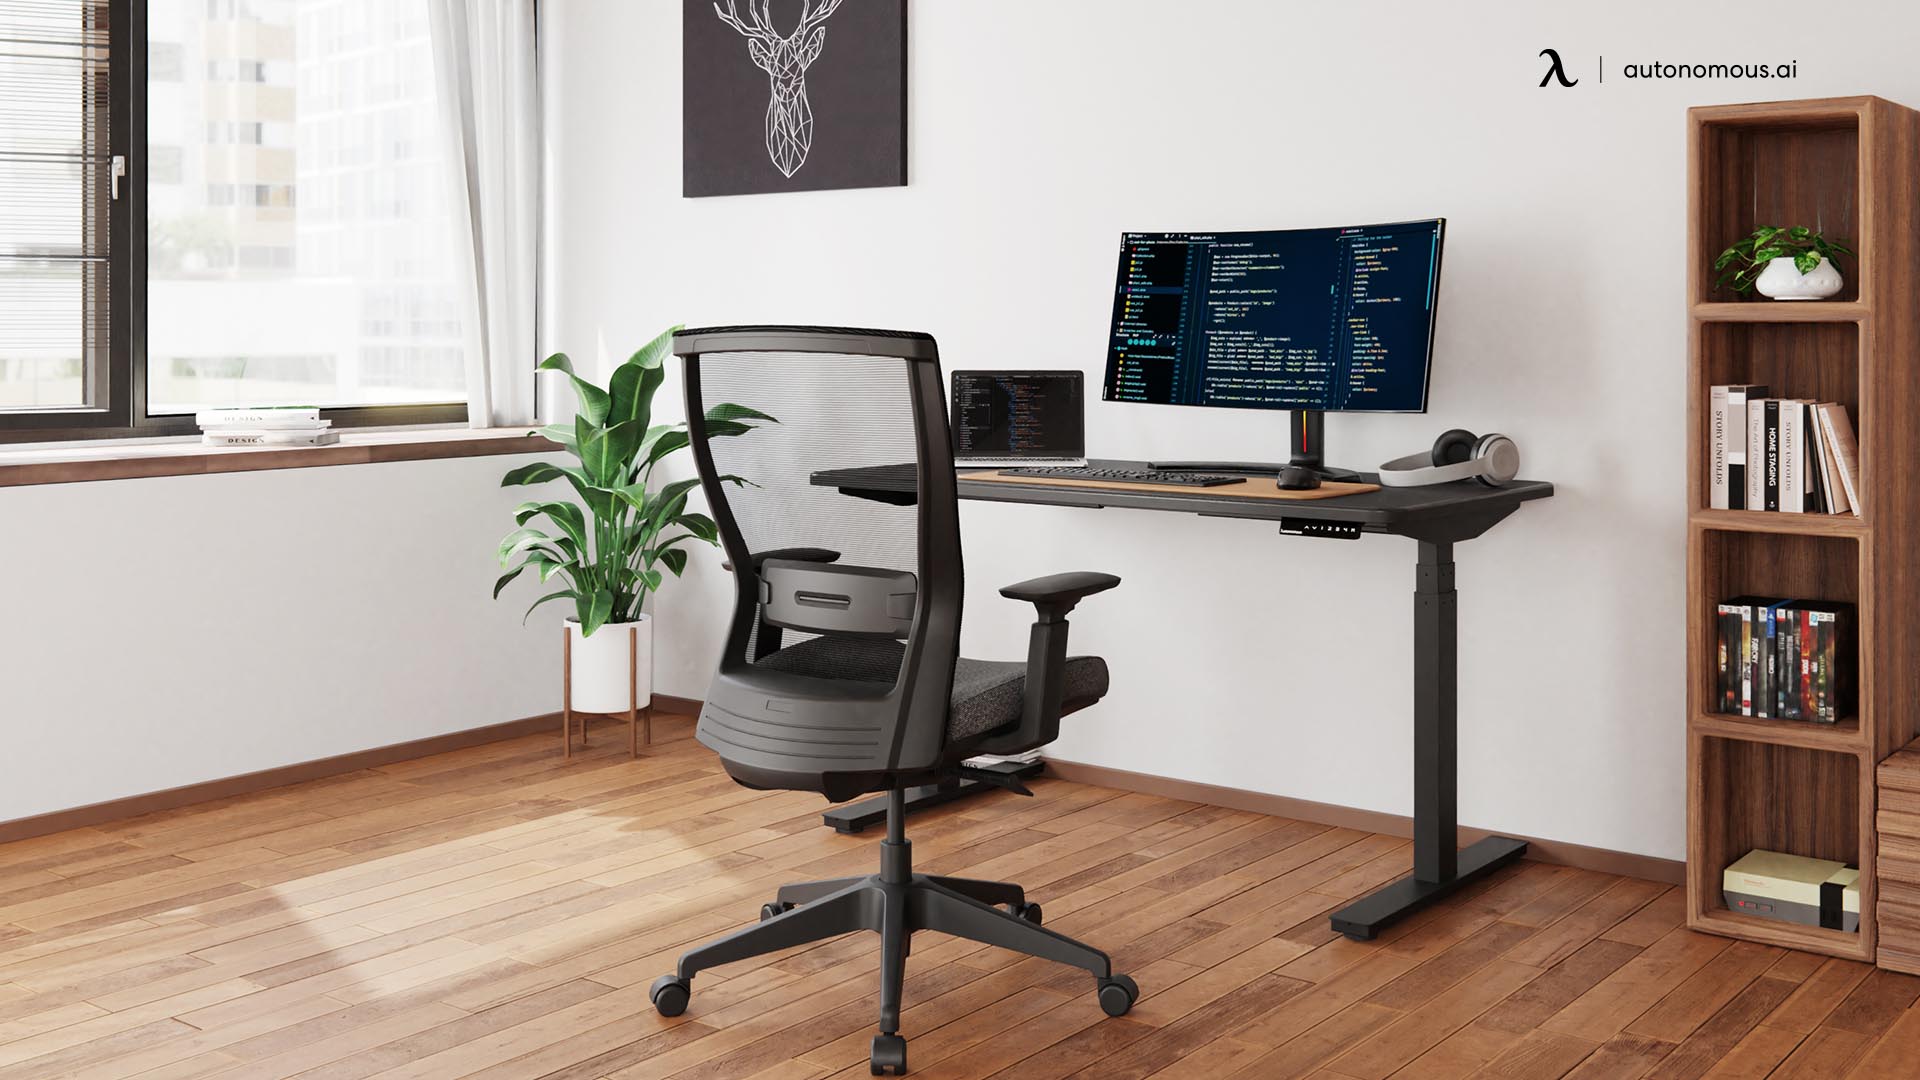 Ergonomic office chair in home office workstation